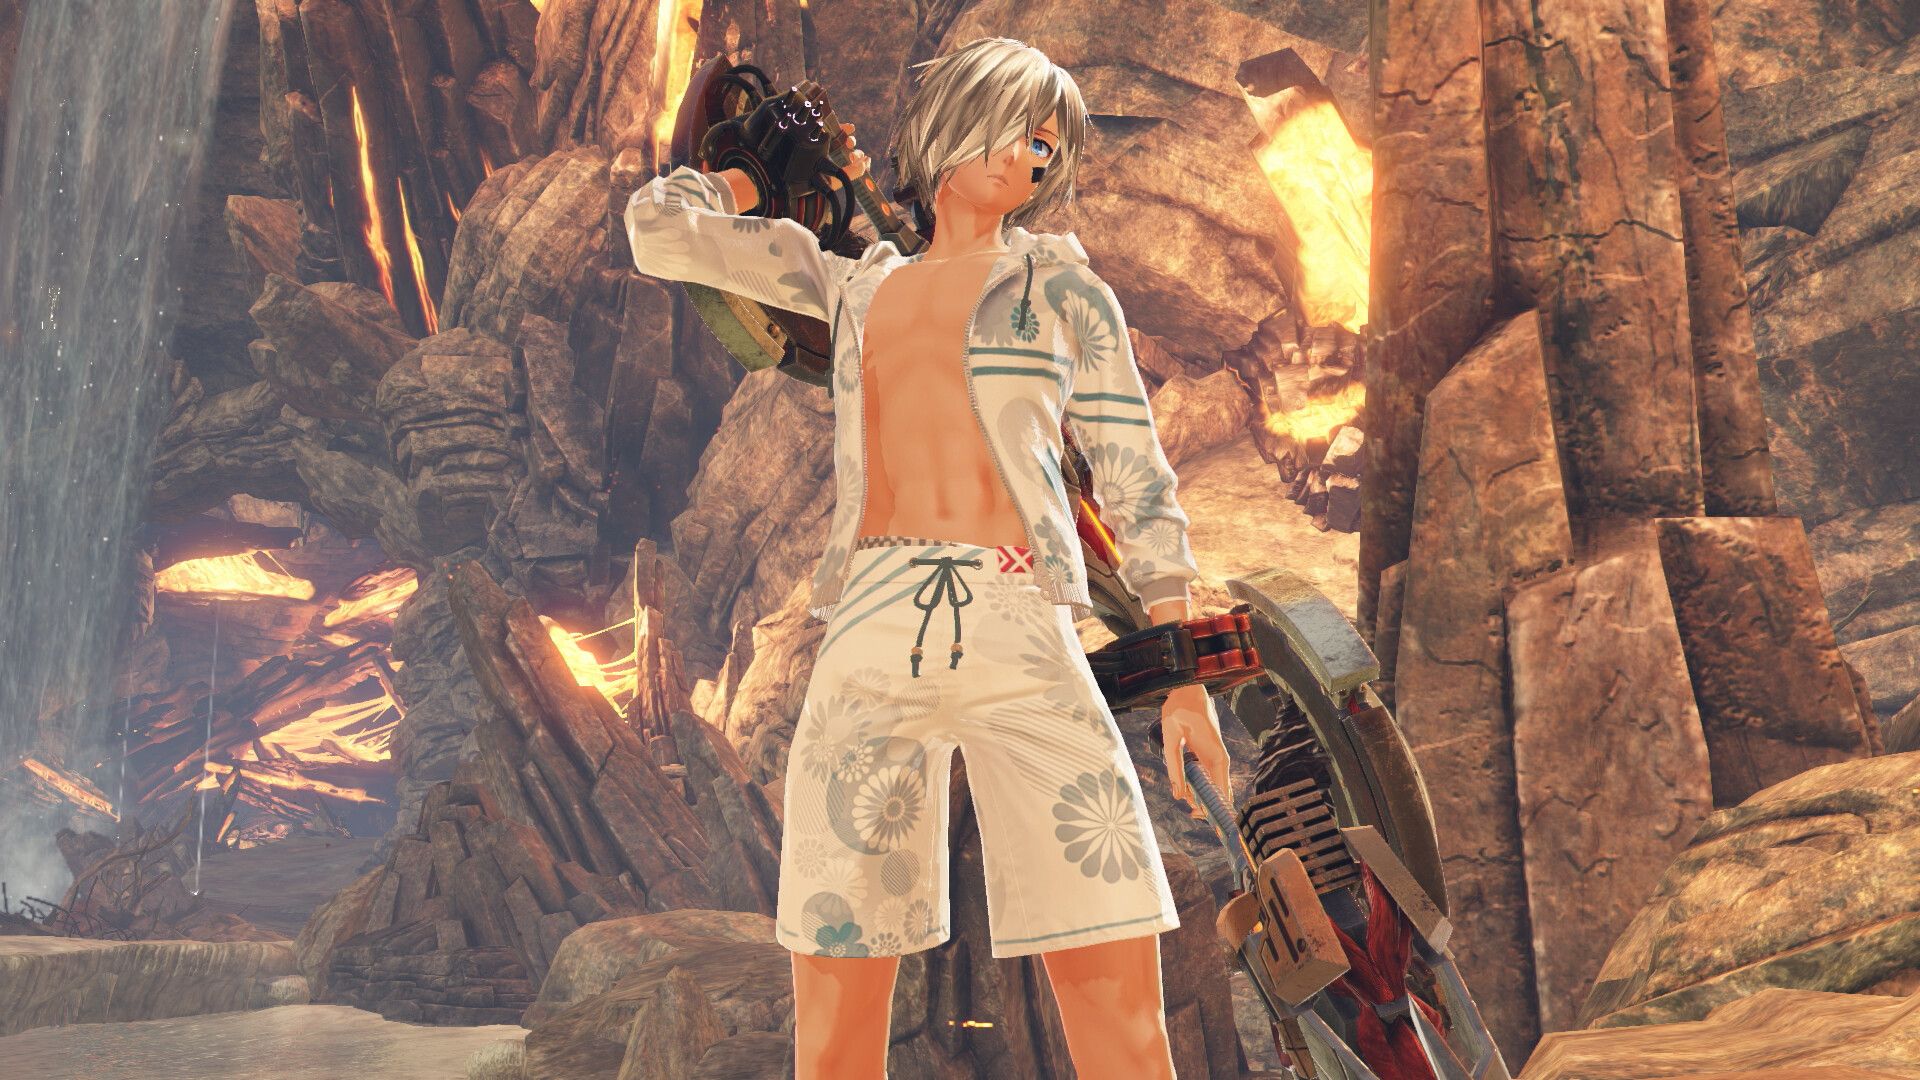 Erotic swimsuit costume for the female hero is added in the free update of [God Eater 3]! 5